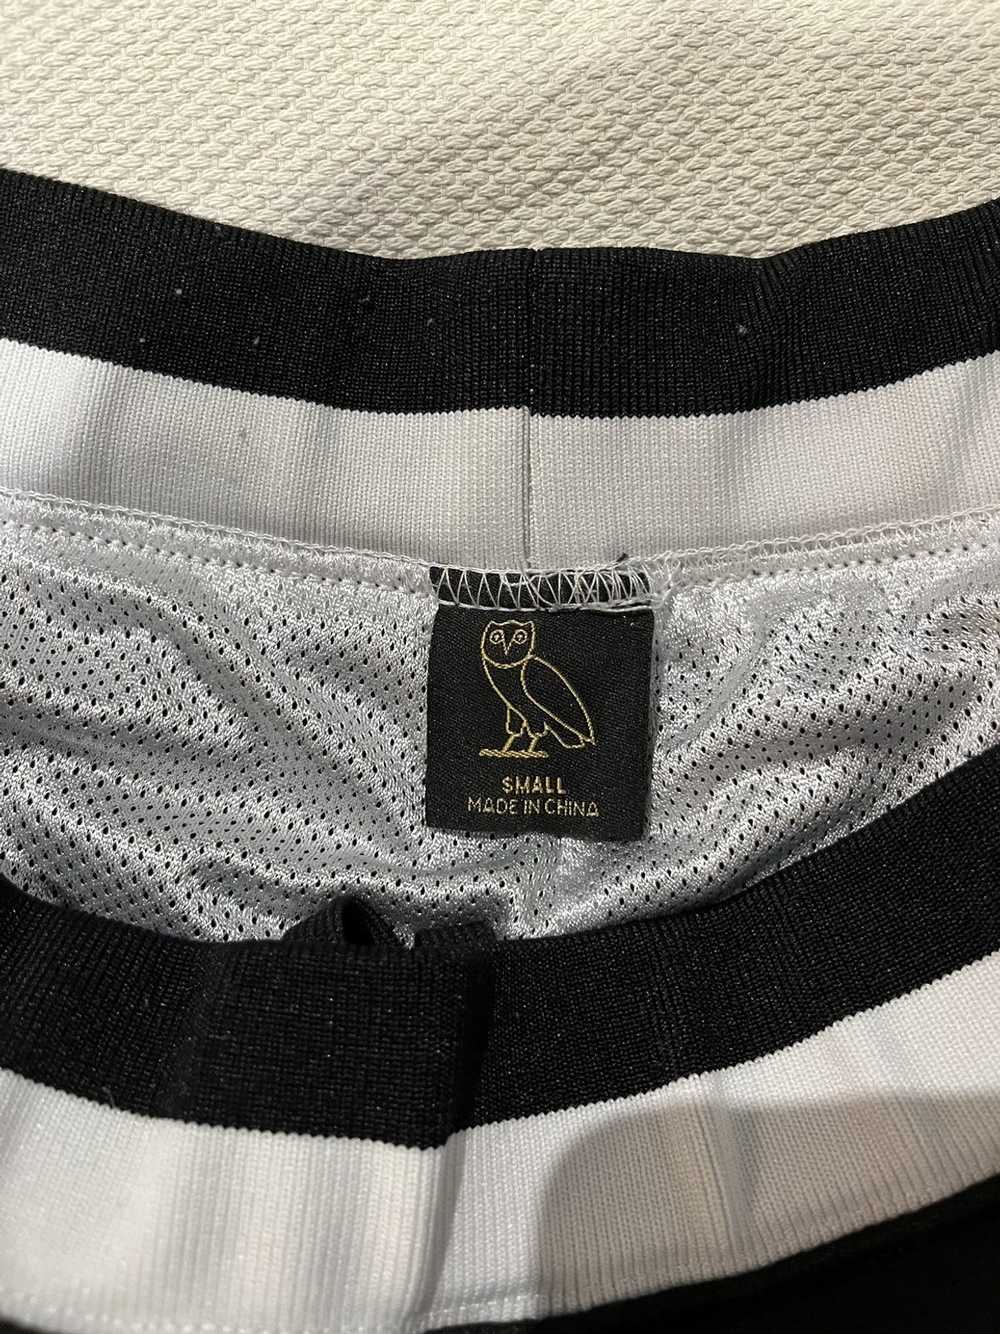 Octobers Very Own OVO Jersey Shorts Big Owl Patch… - image 4